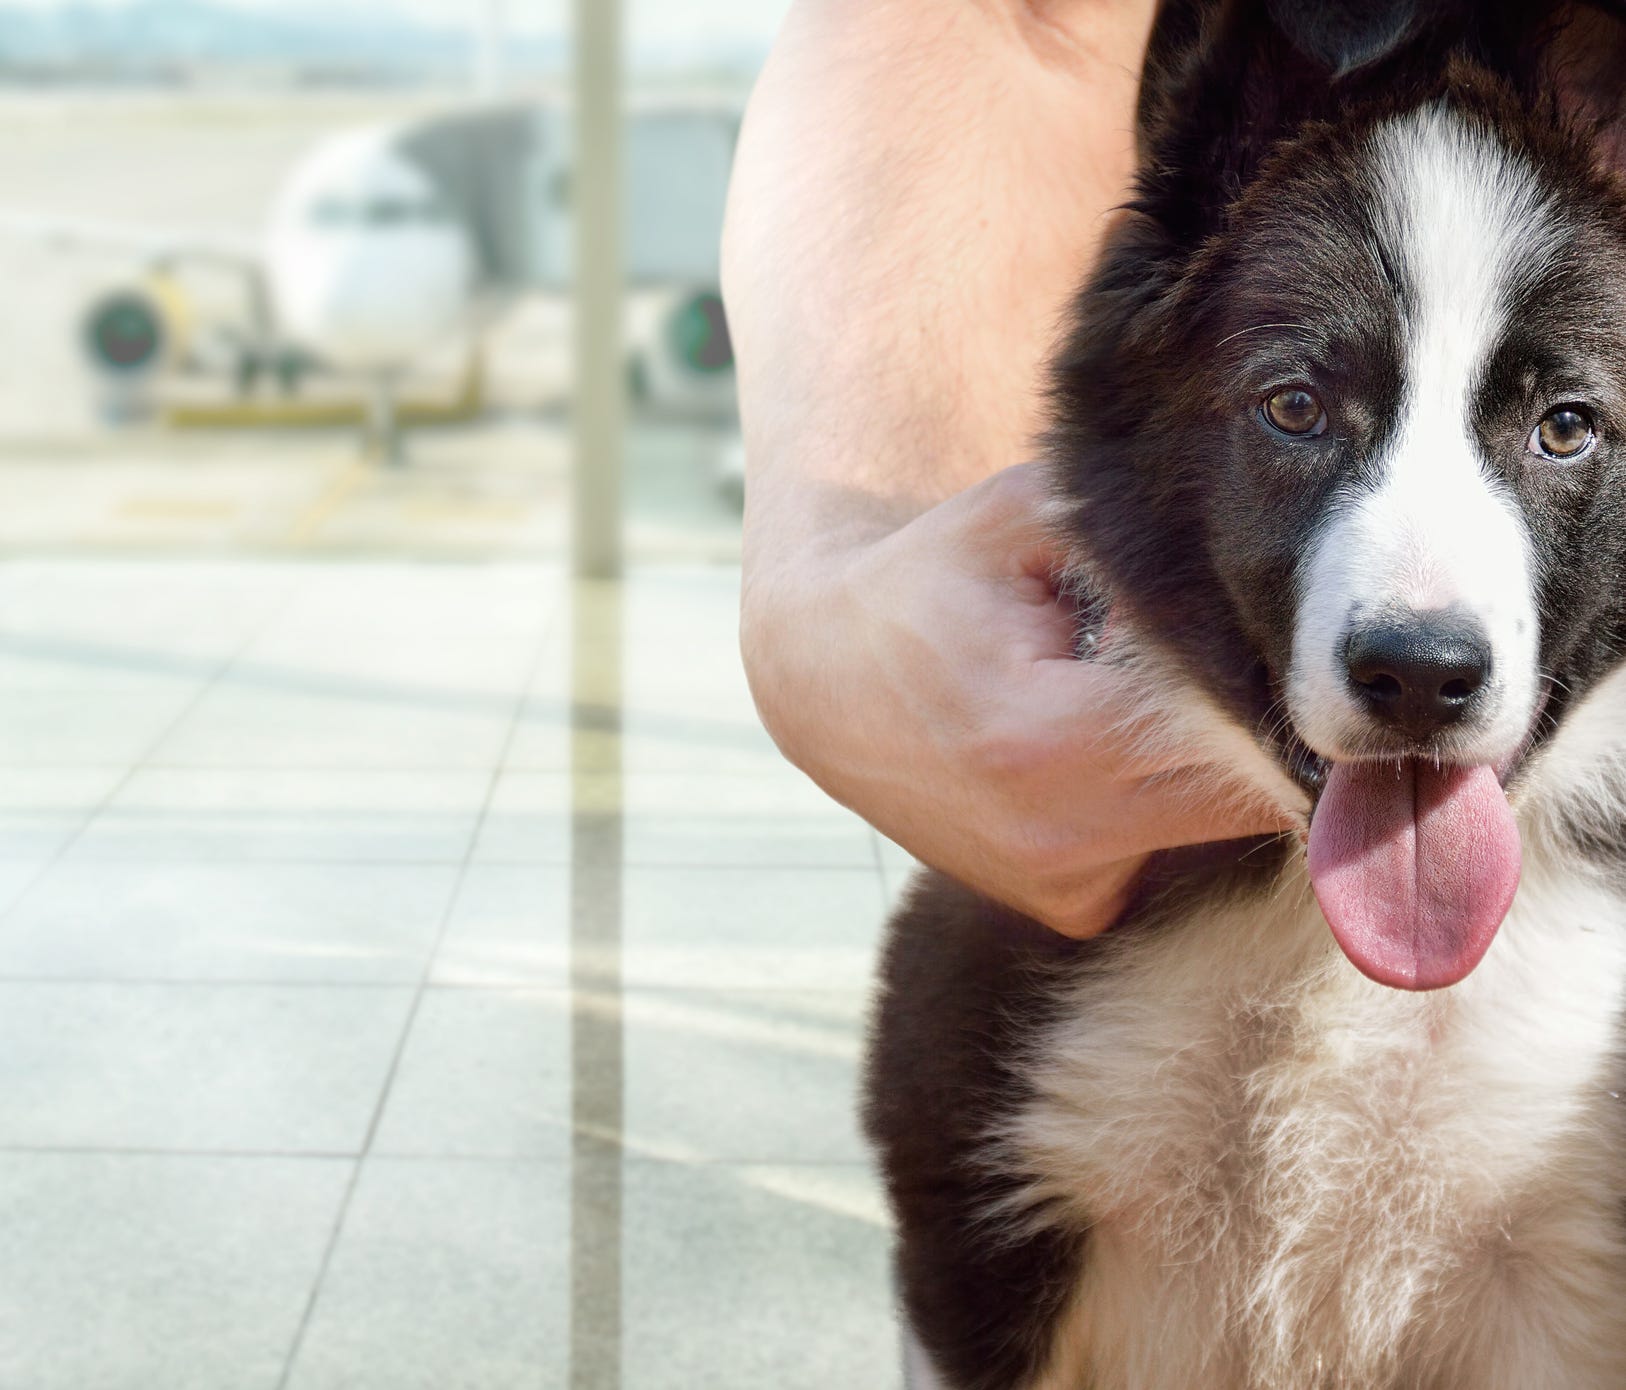 Animal-related incidents are forcing airports to expend extra resources and causing them to rethink policies governing animals in the terminals.